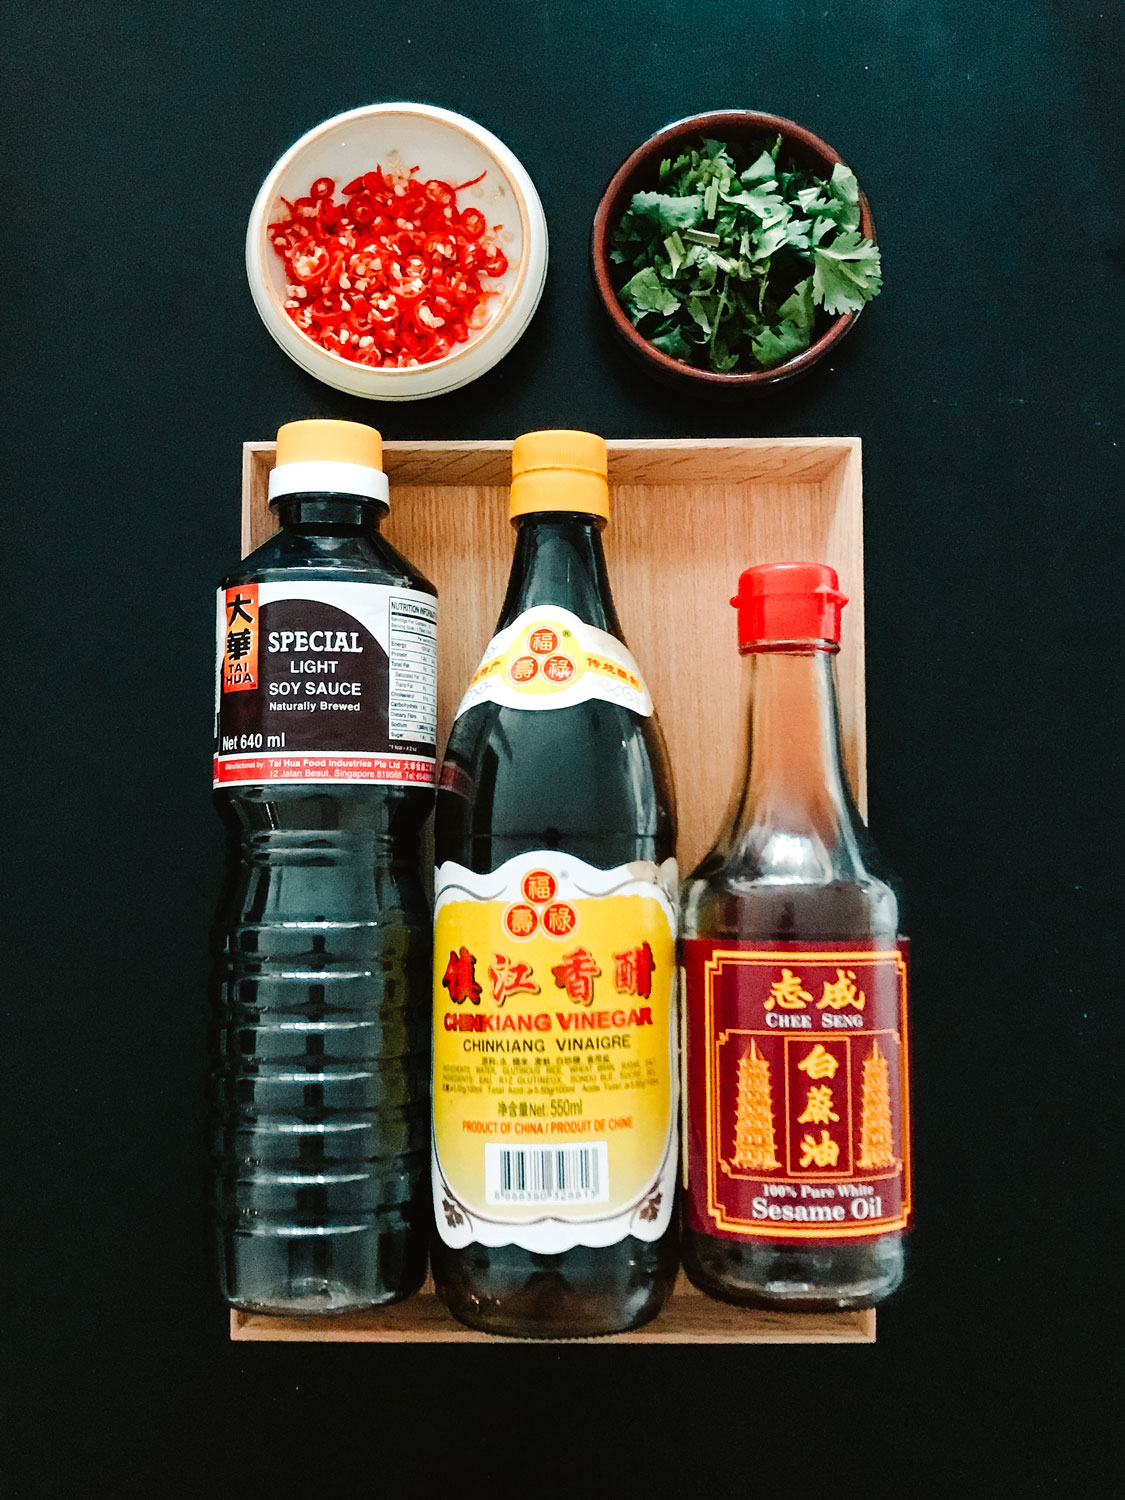 A bottle of sesame oil, soy sauce and black vinegar with small dishes of chili rings and coriander.